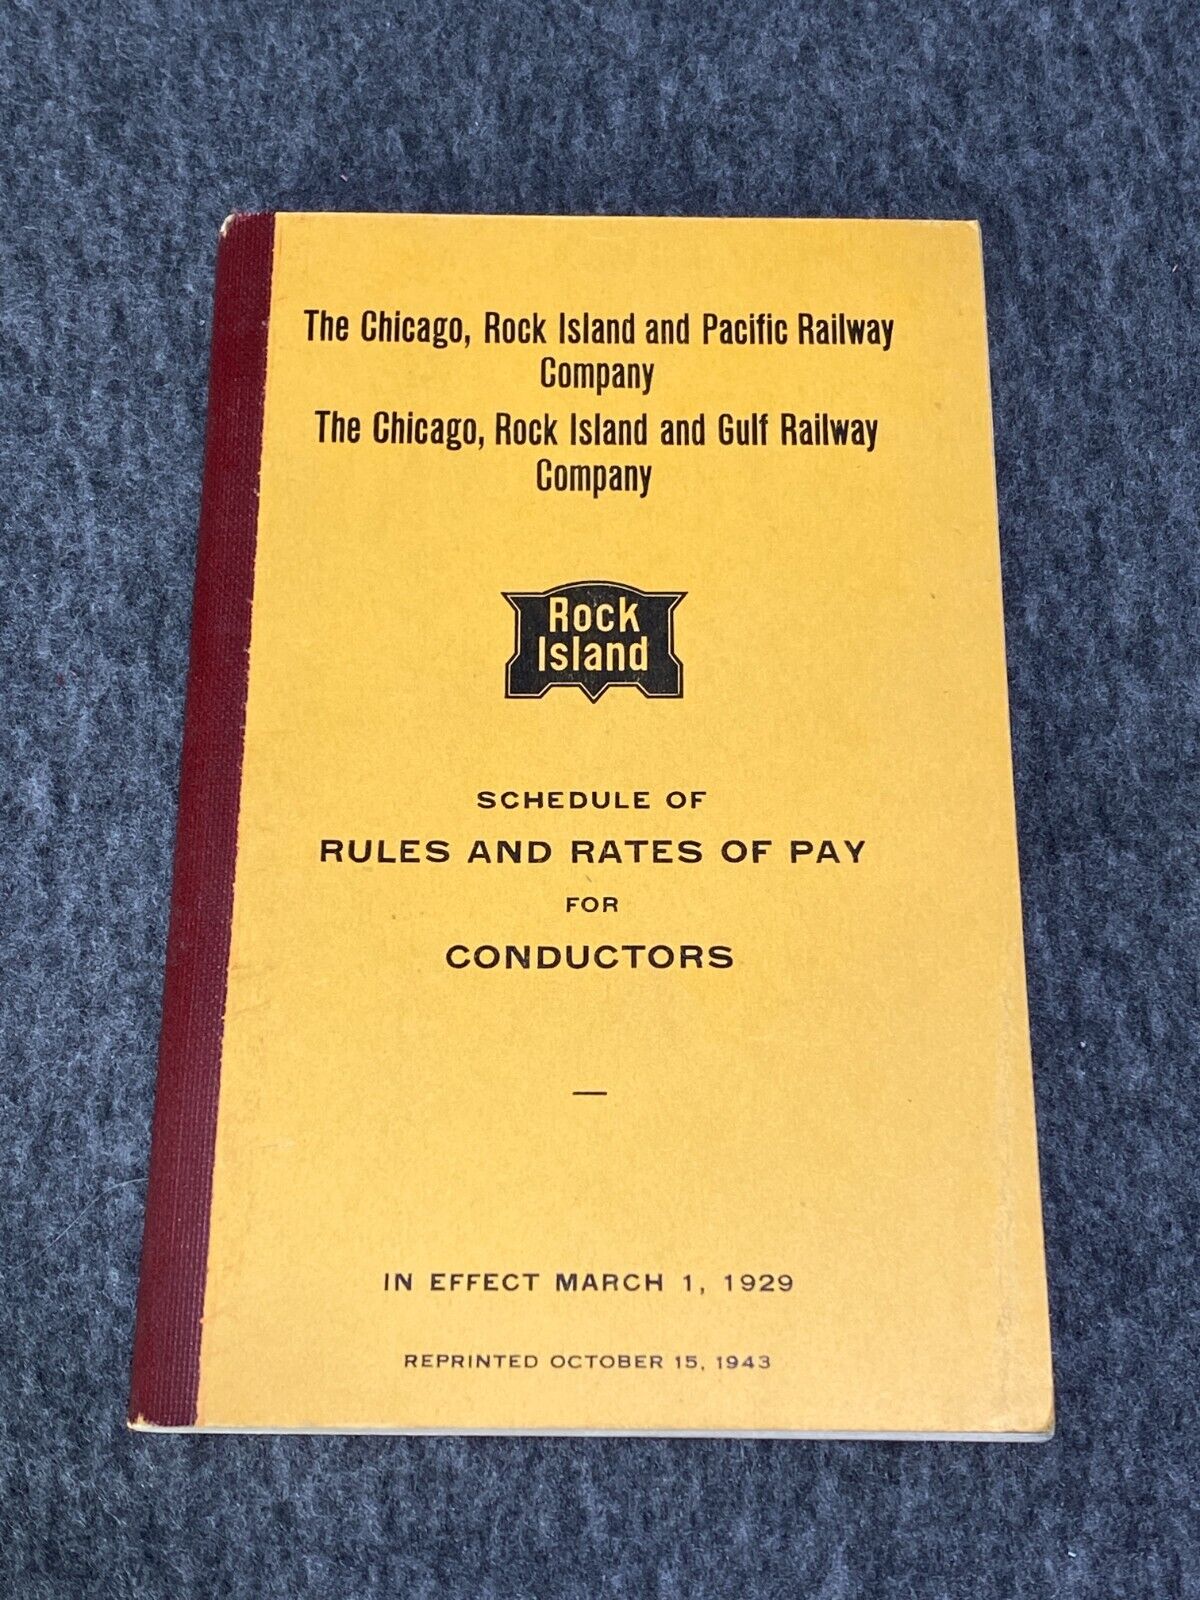 1929 1943 Rock Island Rules and Rates of Pay for Conductors booklet WWII era